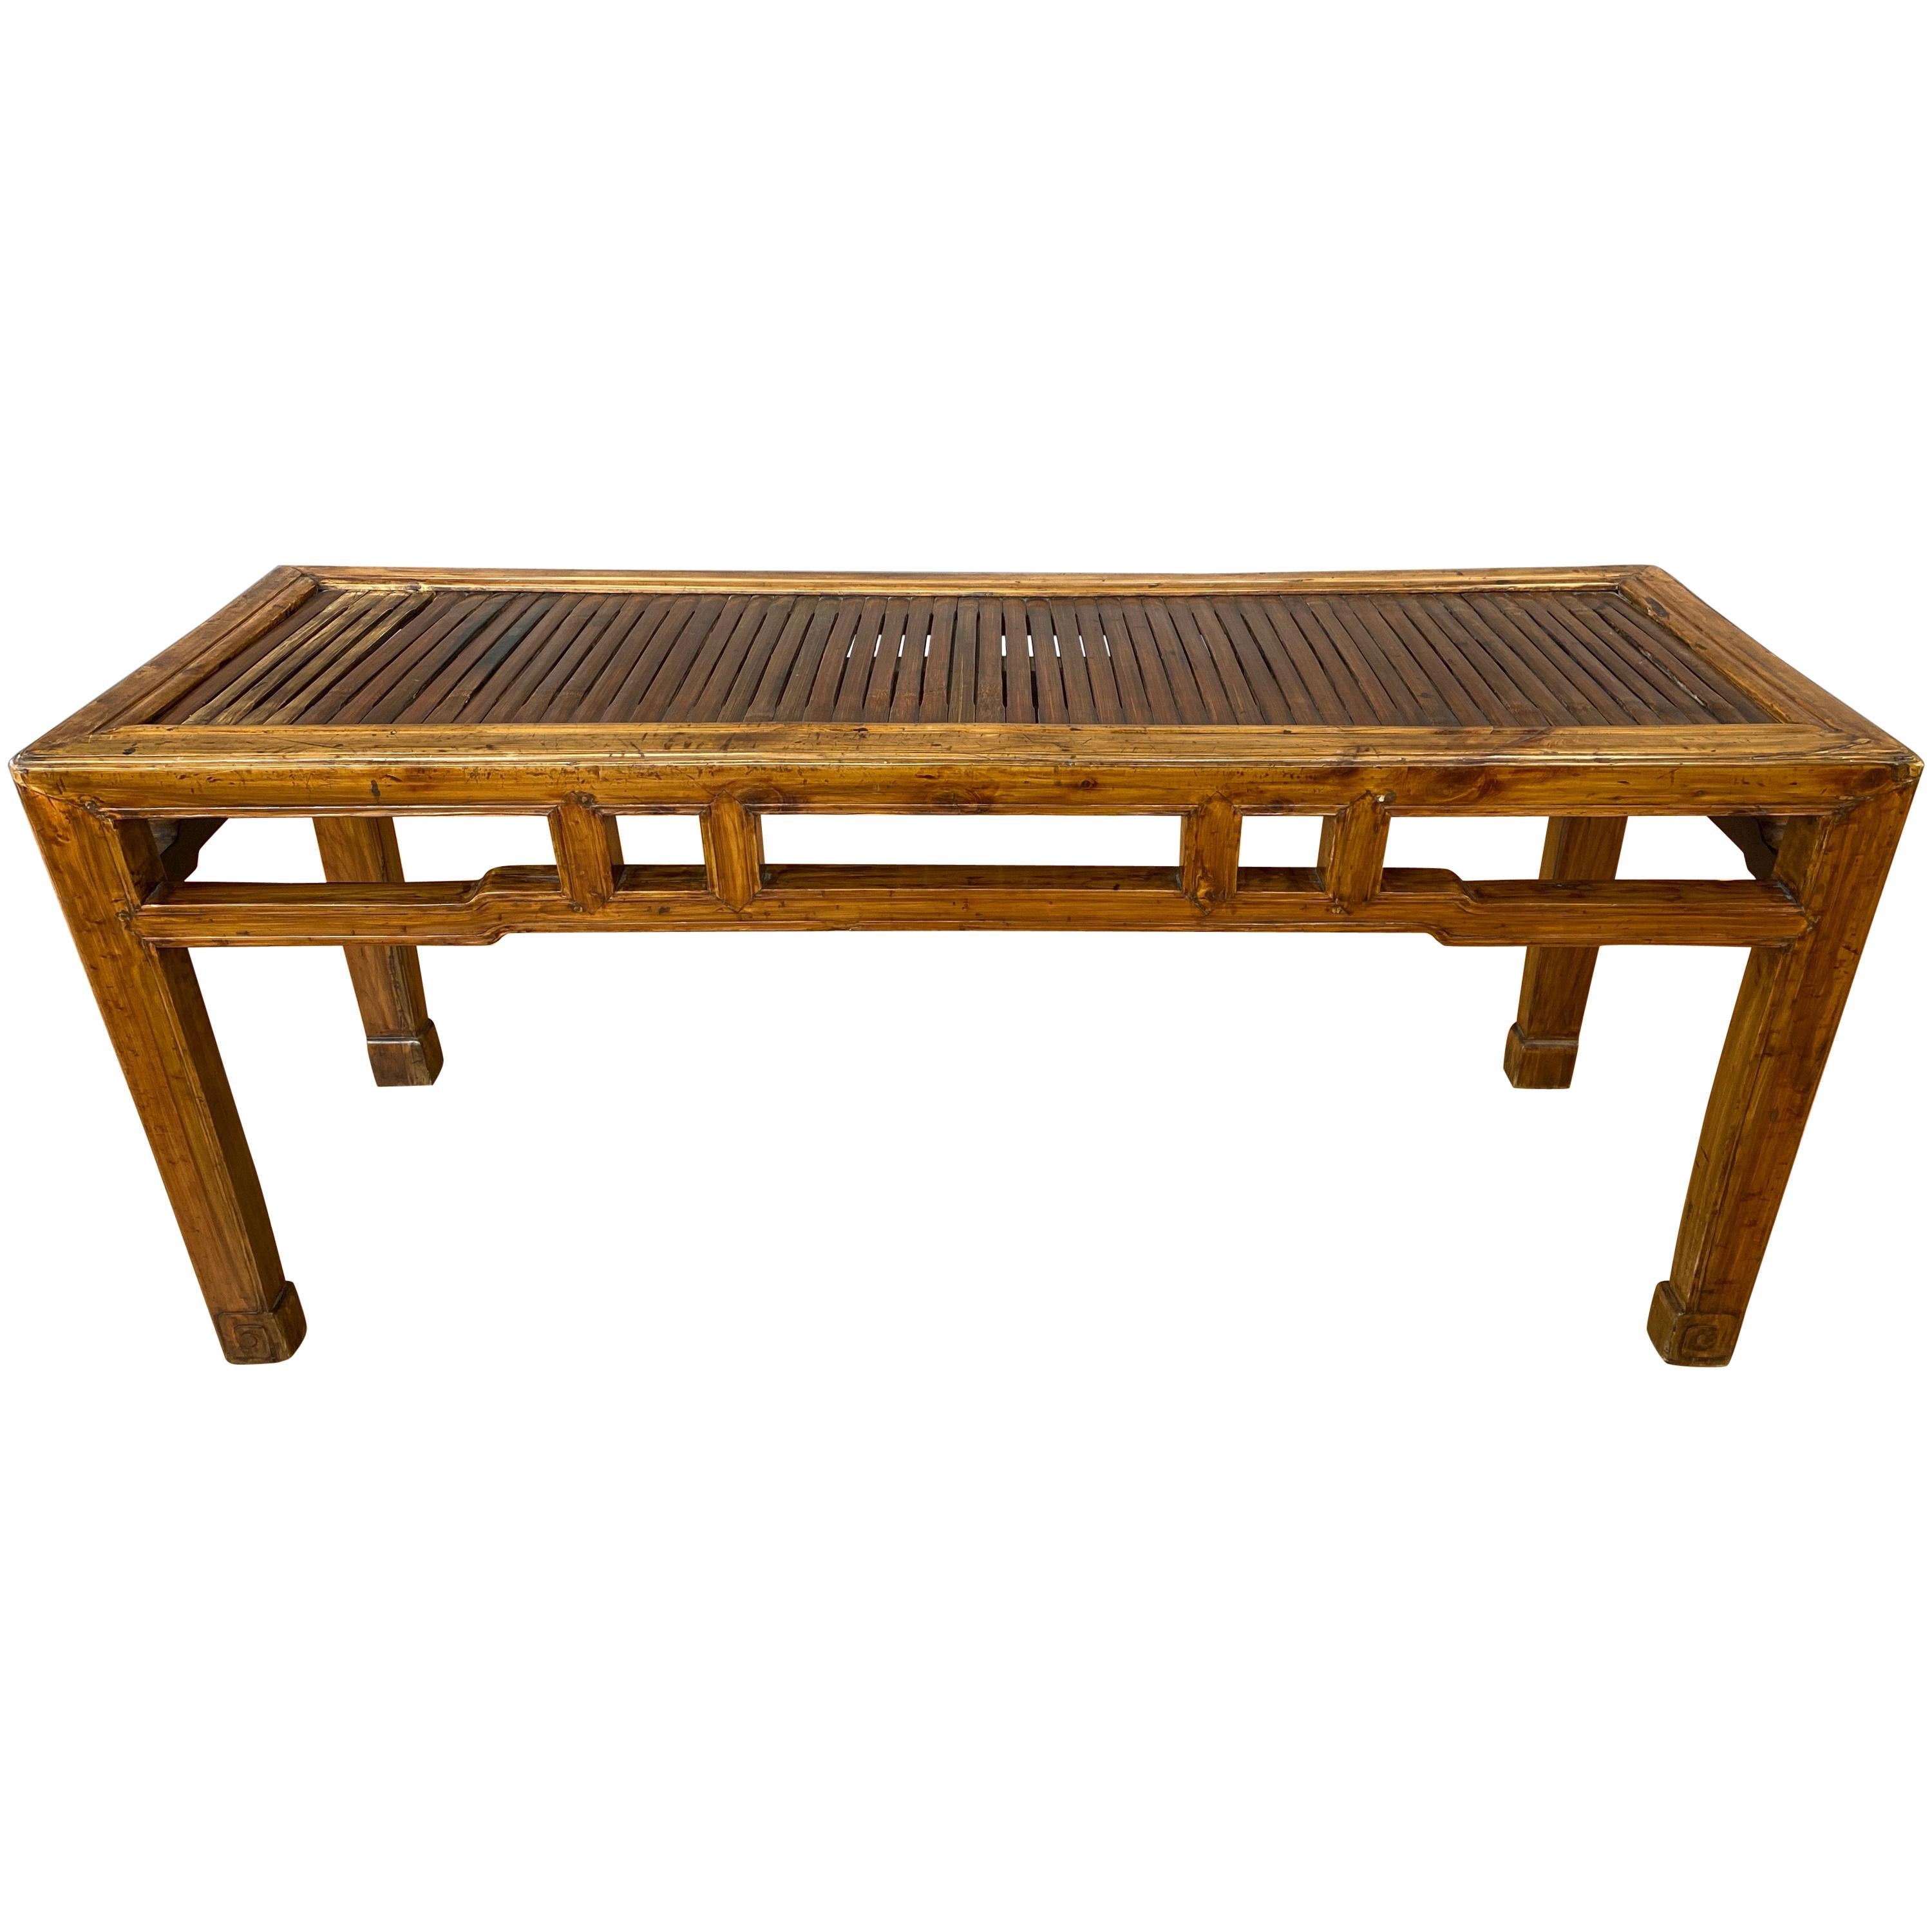 Chinese Qing Dynasty Elm Bench or Coffee Table with Bamboo Top, 19th Century